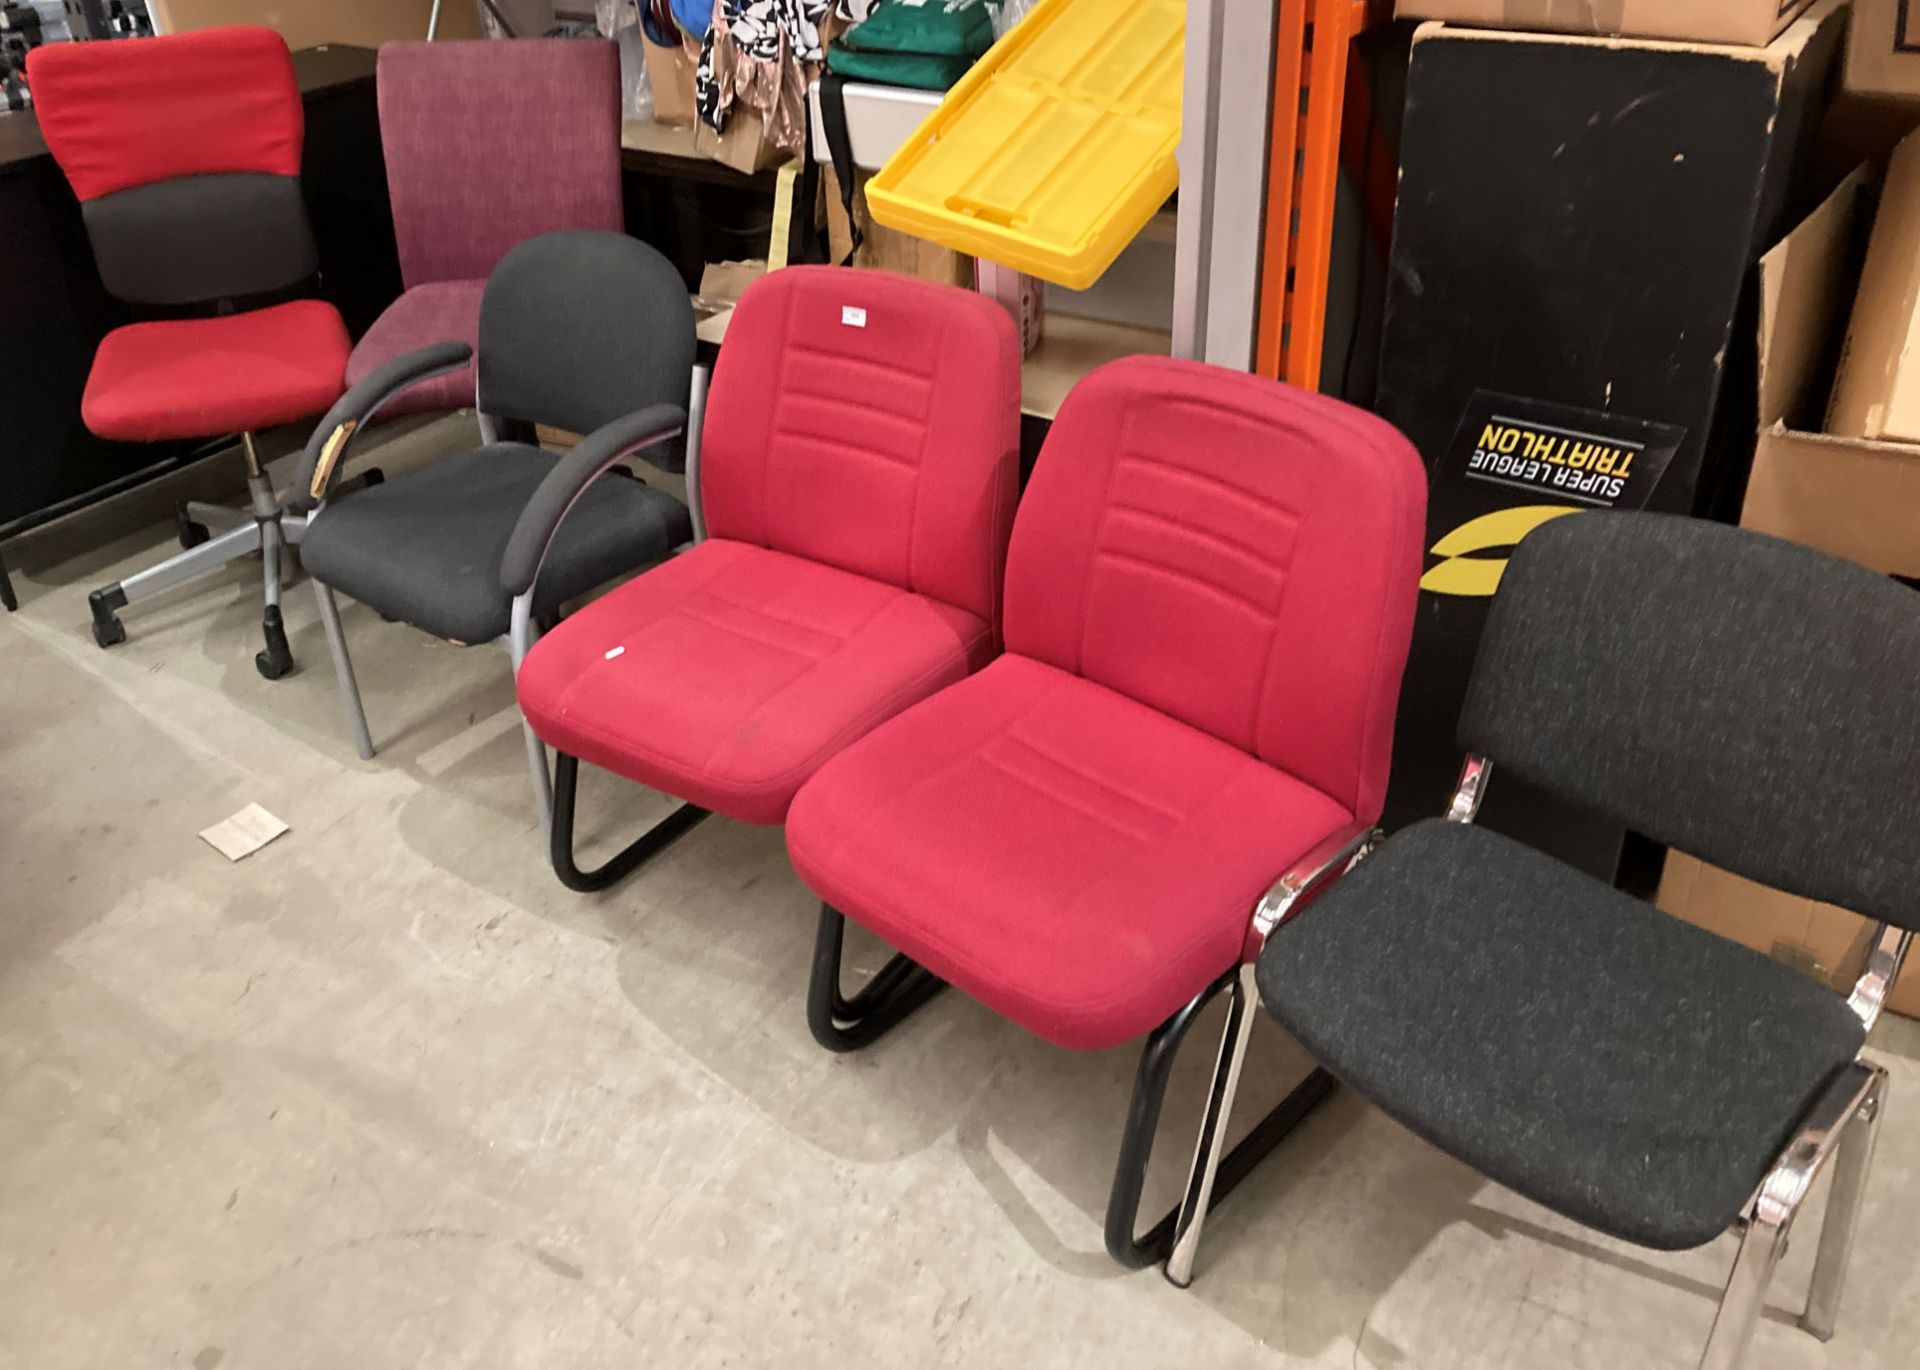 6 x assorted office chairs - 2 swivel,